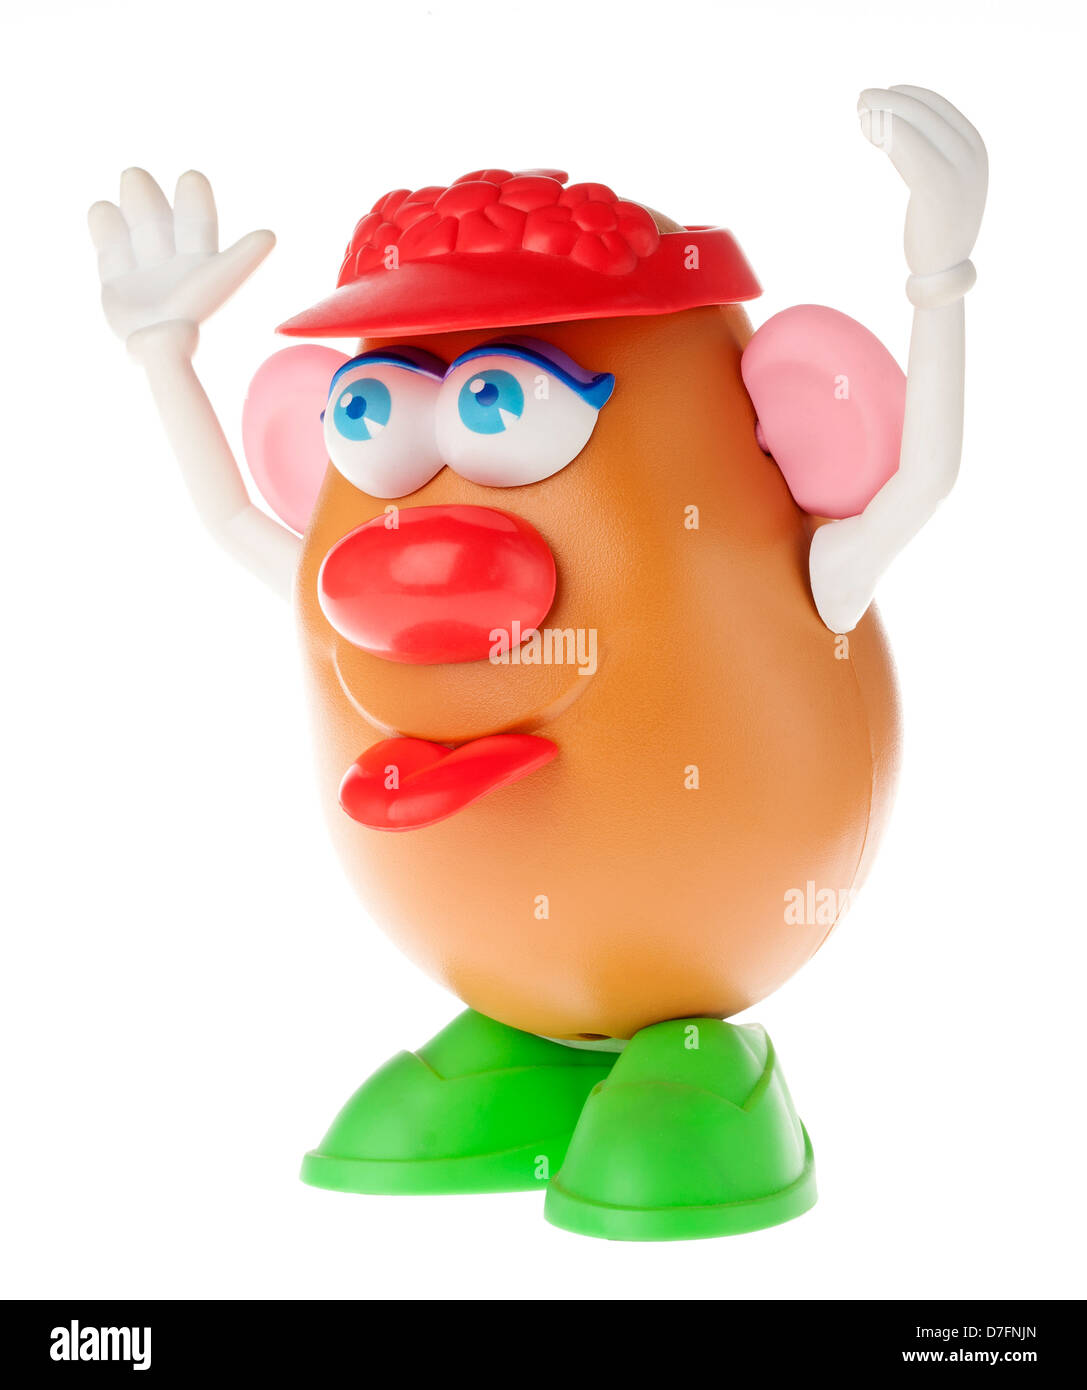 Tel-Aviv Israel - January 25th 2012: Isolated on white studio shot famous toy Mr. Potato Head by Hasbro company. This time it Stock Photo